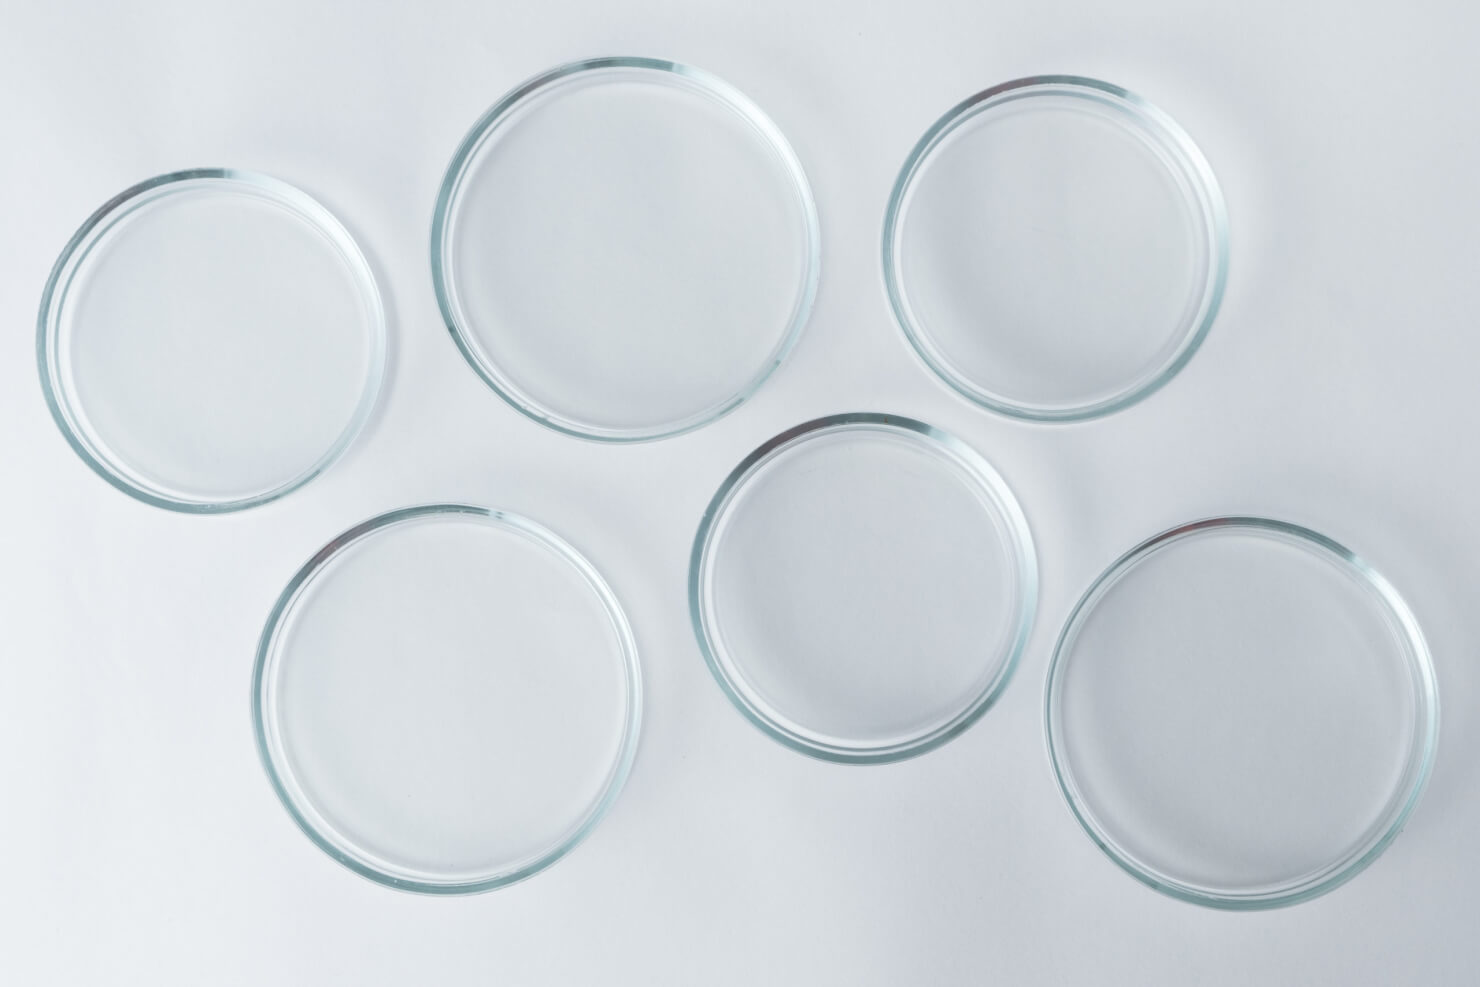 Empty glass petri dishes on a white table